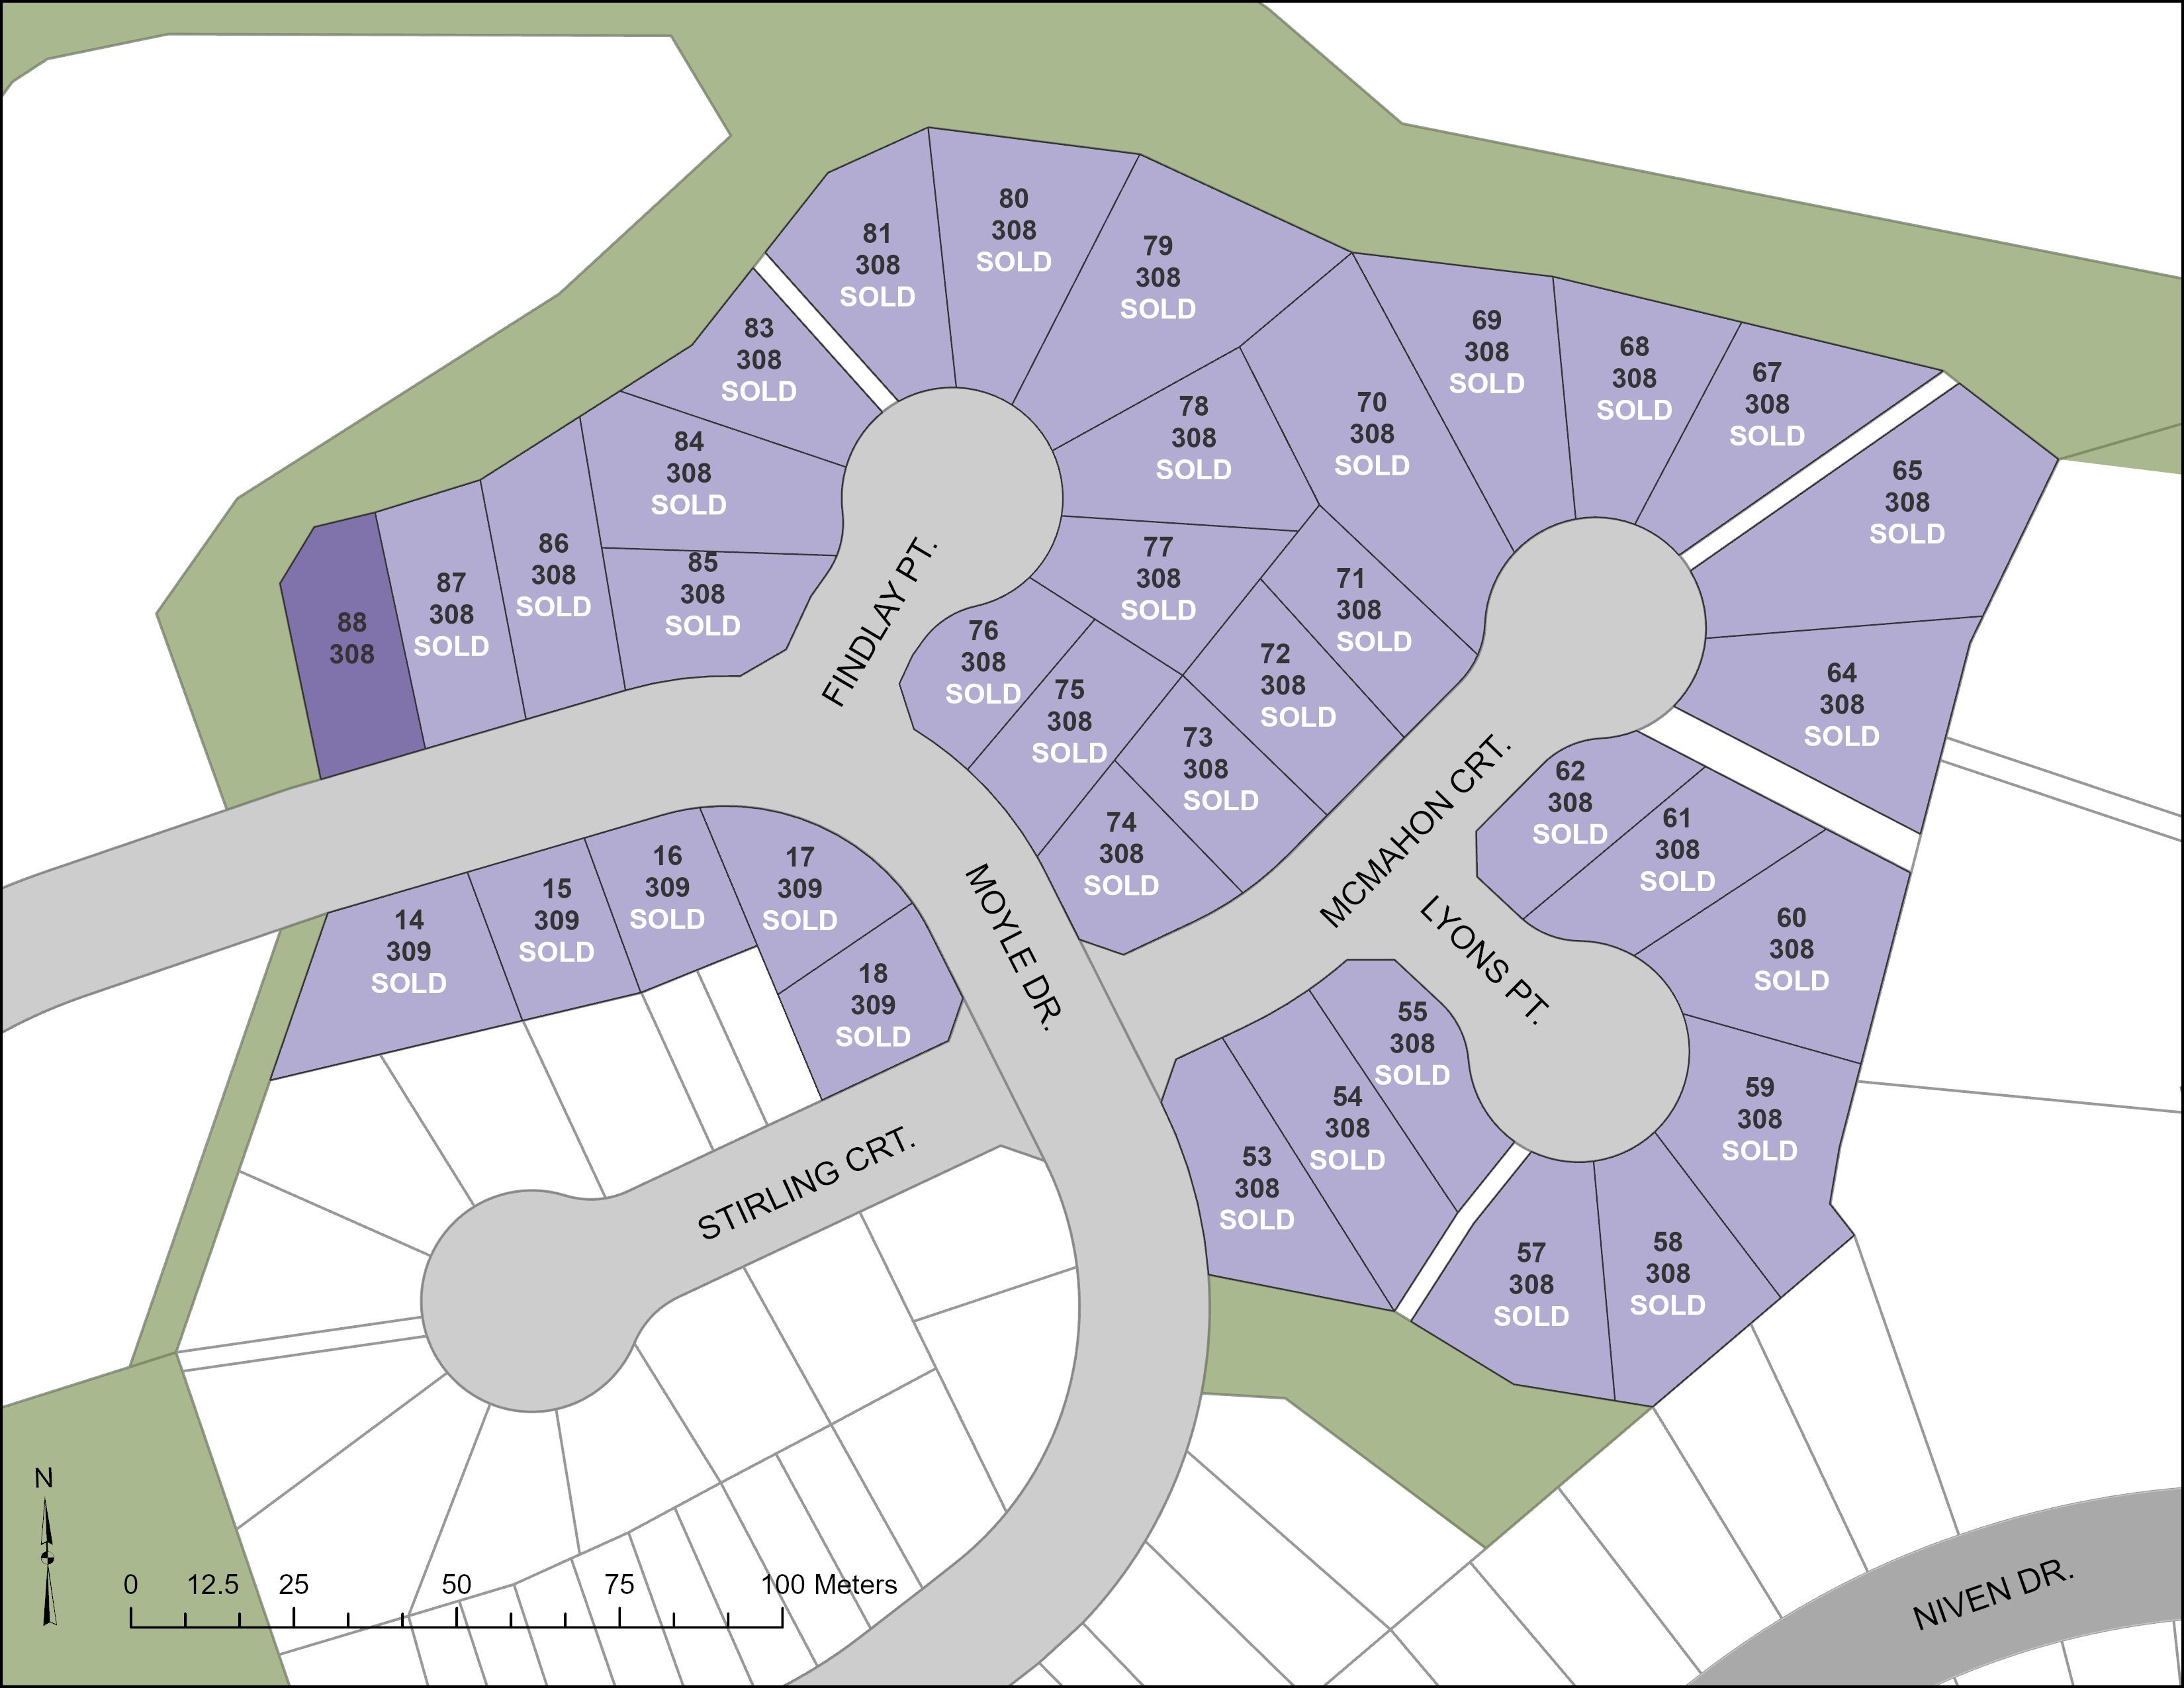 Map of Niven Lake Phase 7 residential area showing available lots which are described in the table below